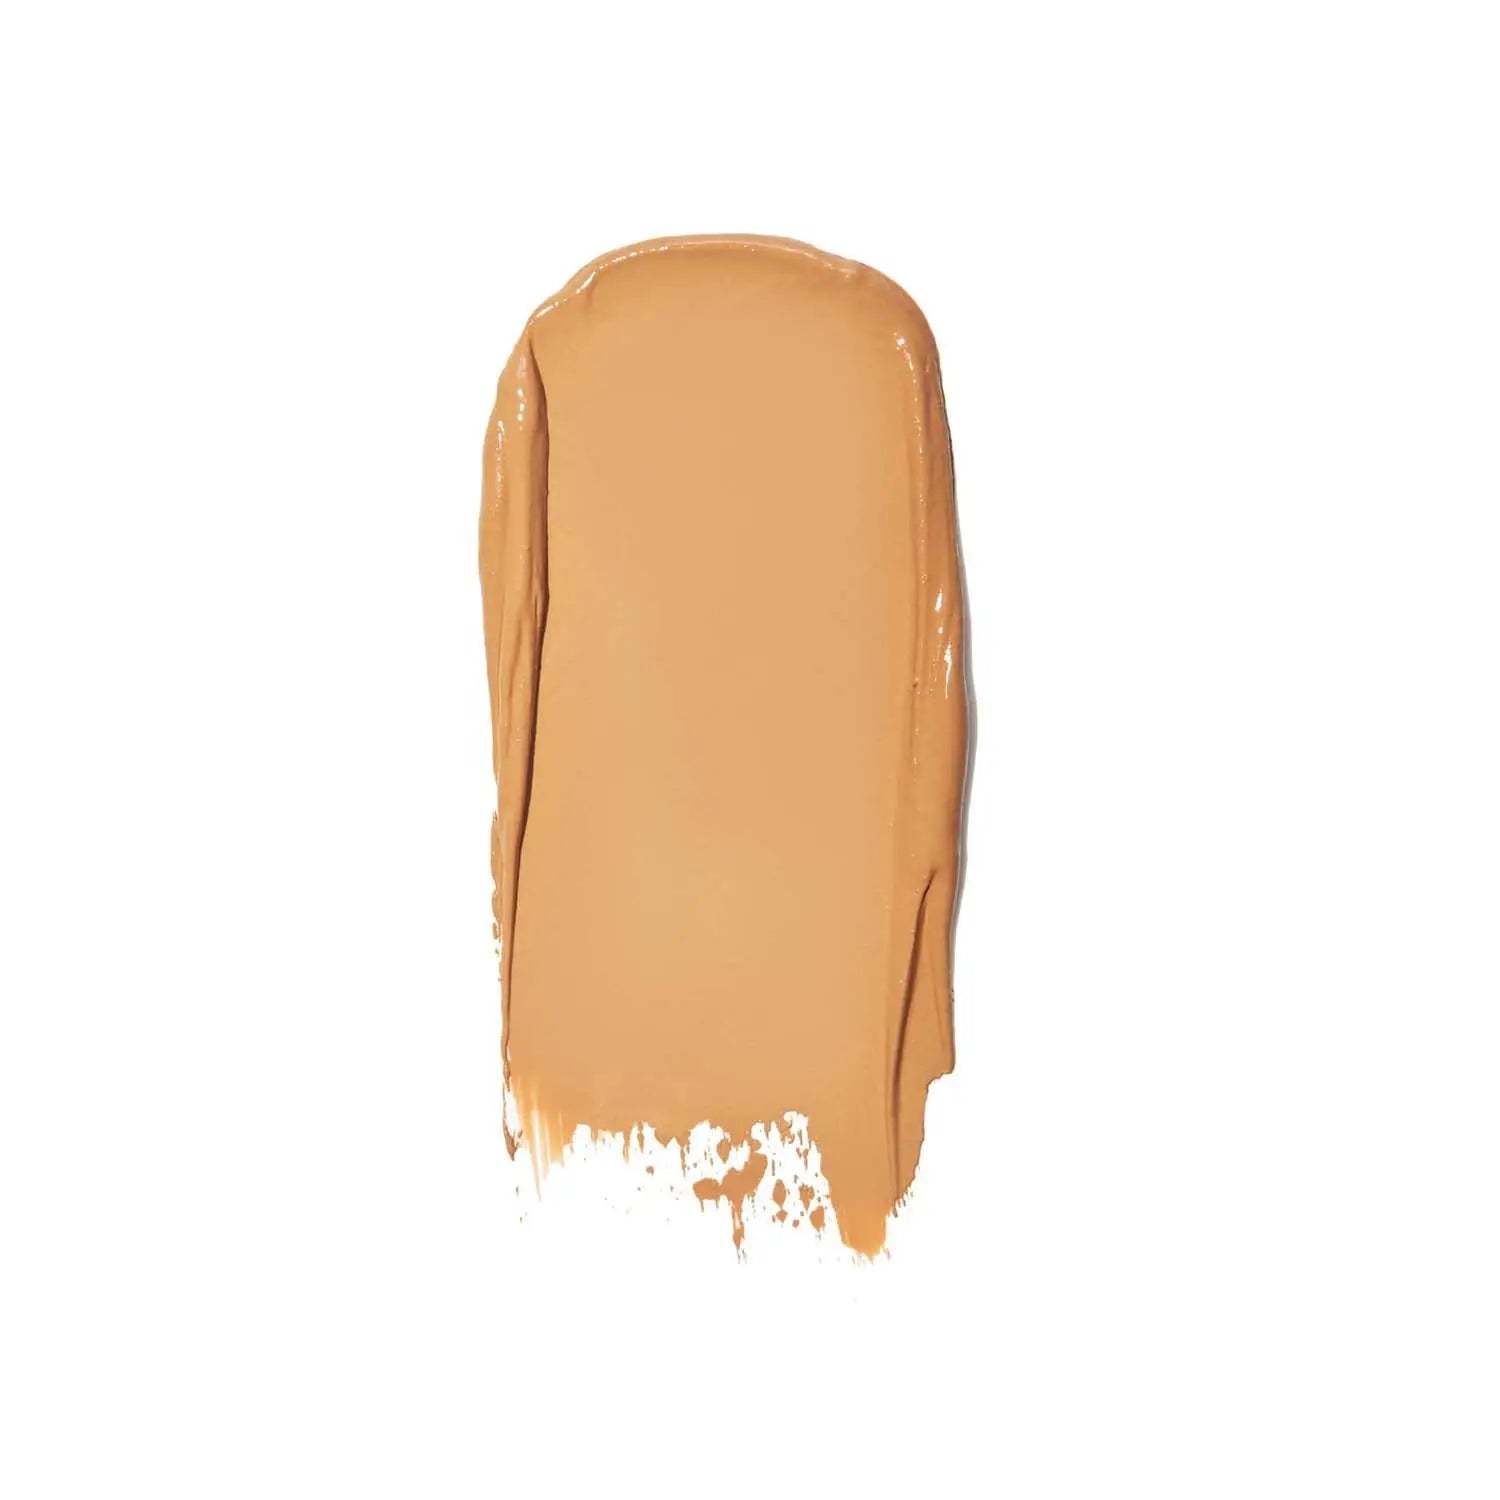 RMS Beauty Un' Cover-up Cream Foundation, 30ml - 99